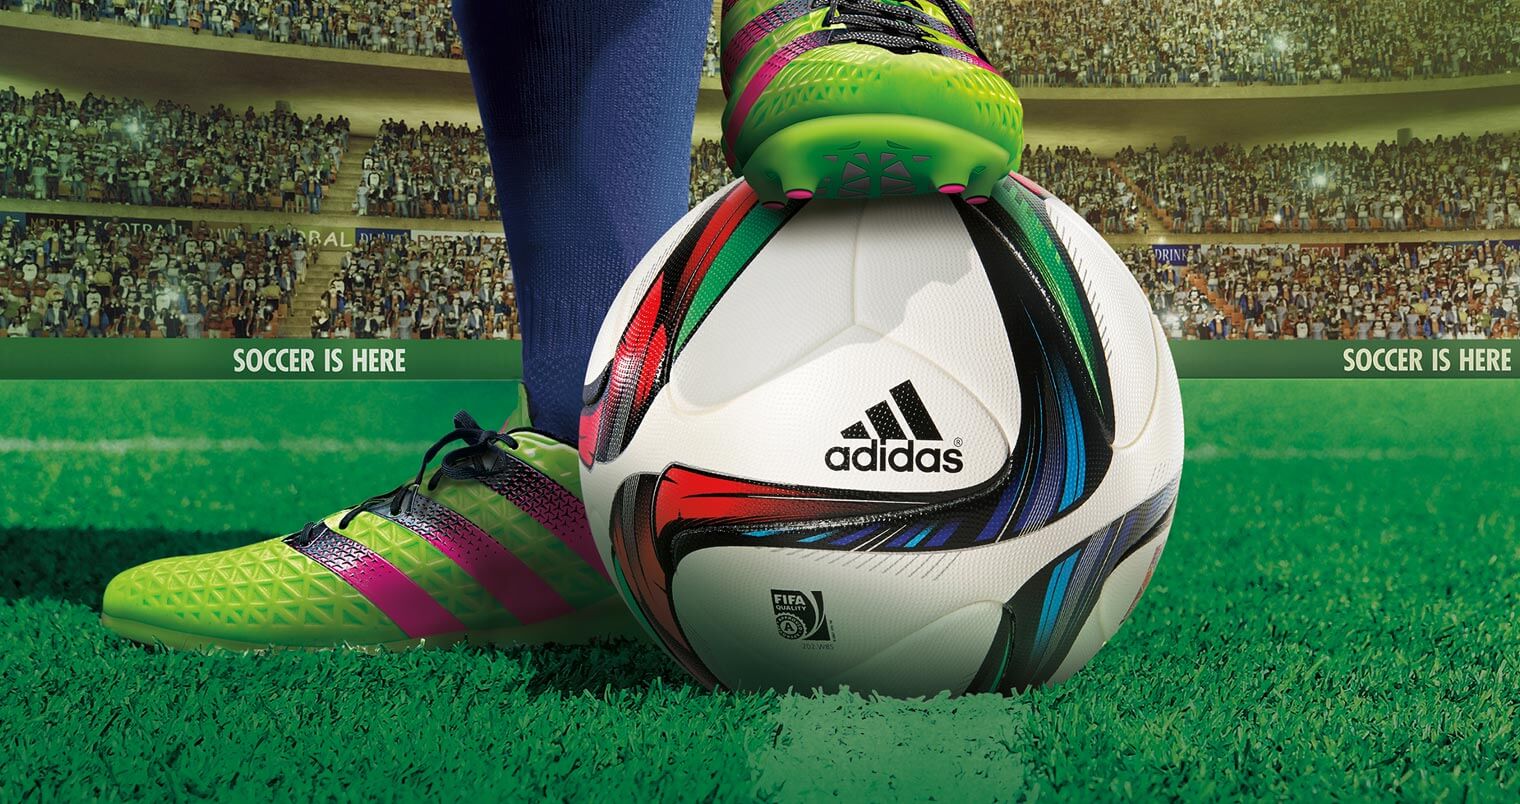 Heineken® "The Score. You Score" Program Offers Soccer Fans a Chance to Win Big, Every Game, Every Goal., featured image